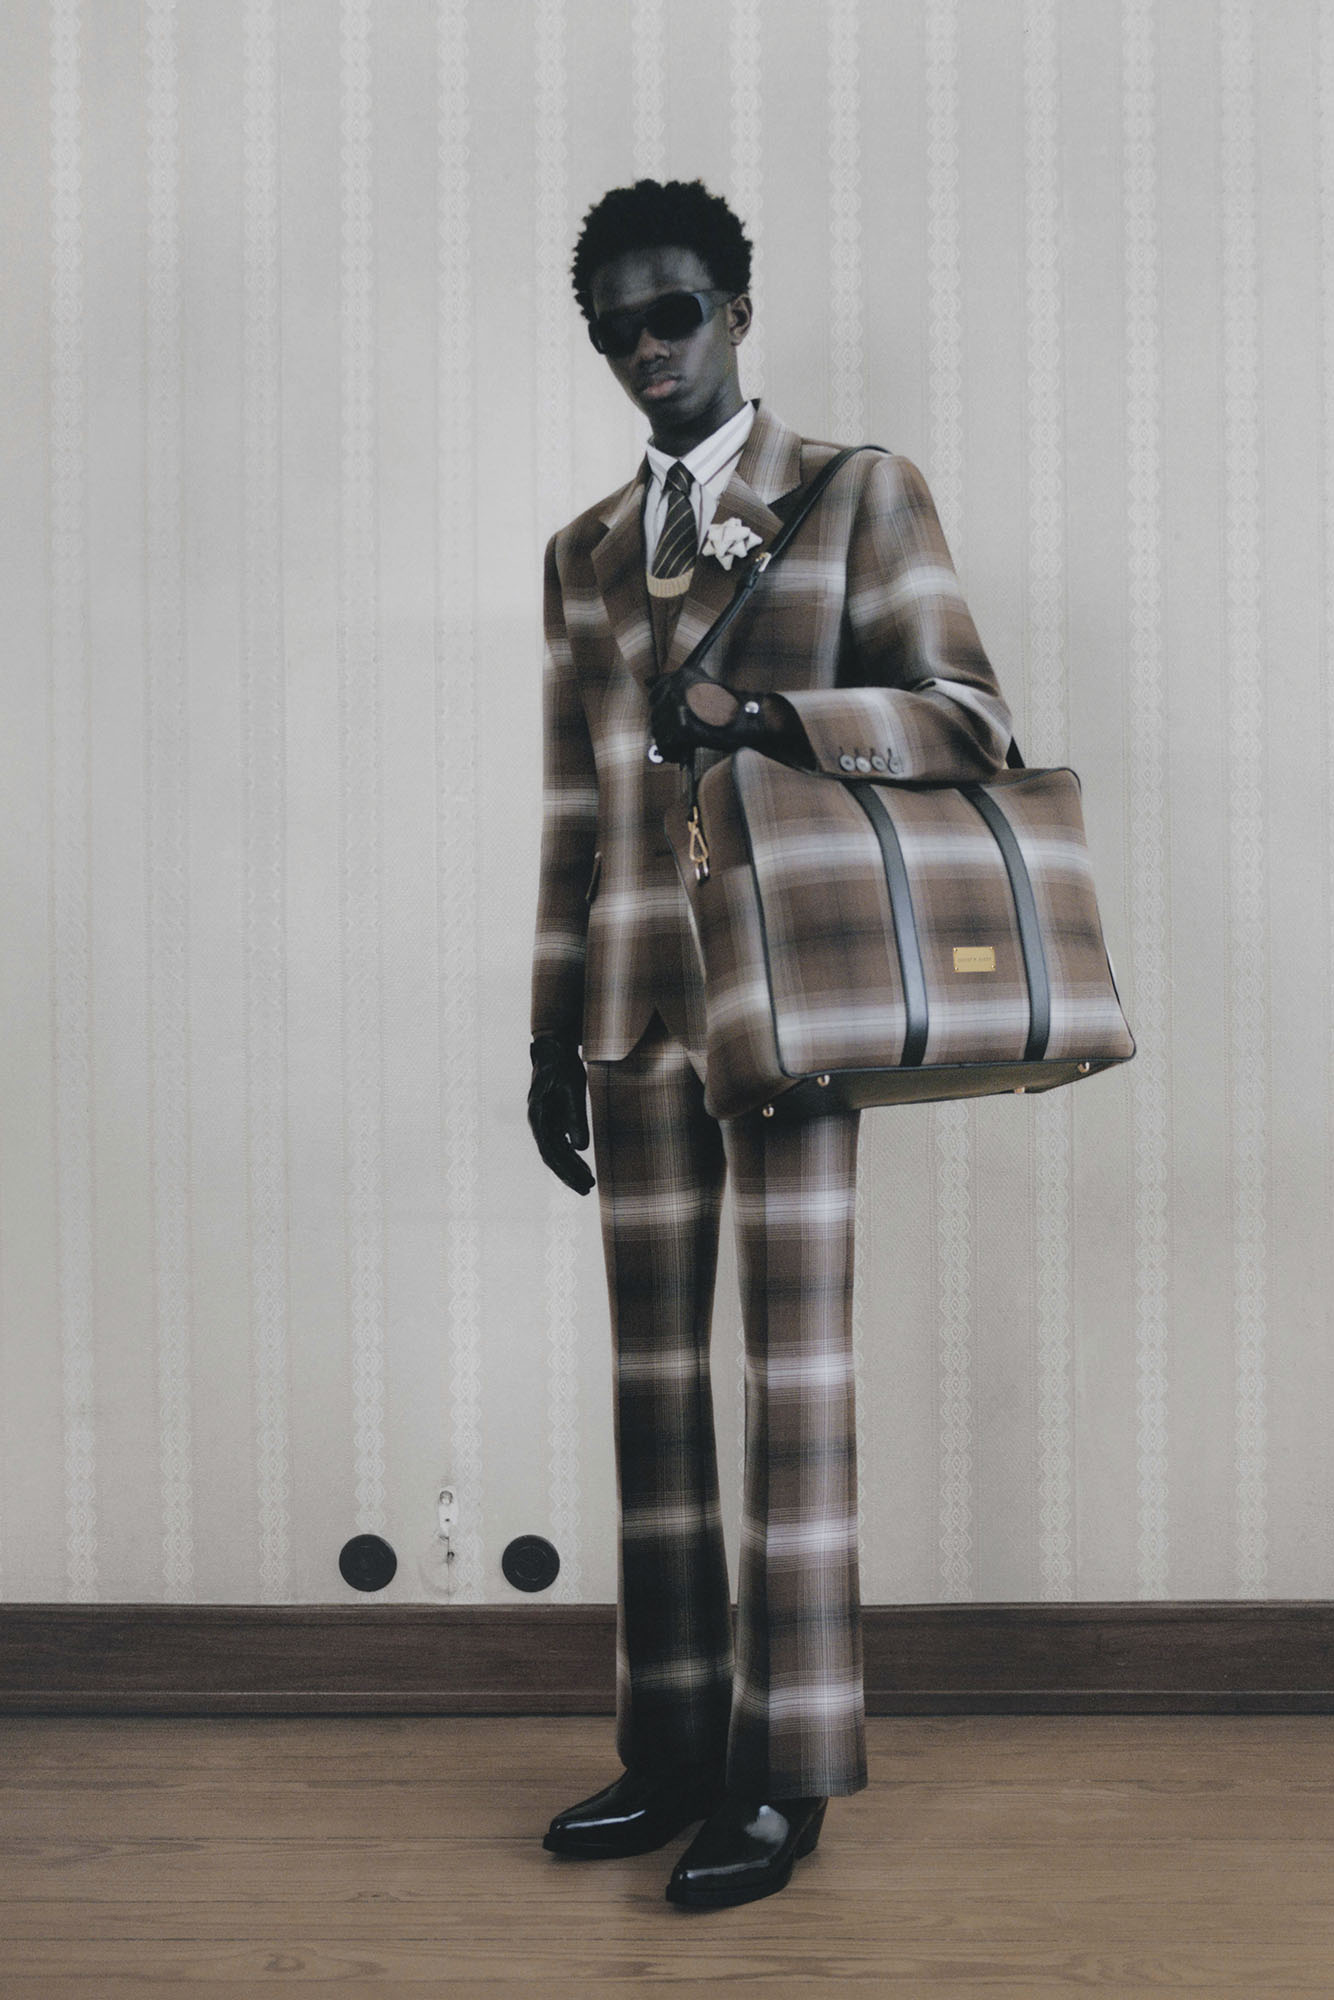 Man in plaid suit with bag in front of white wall